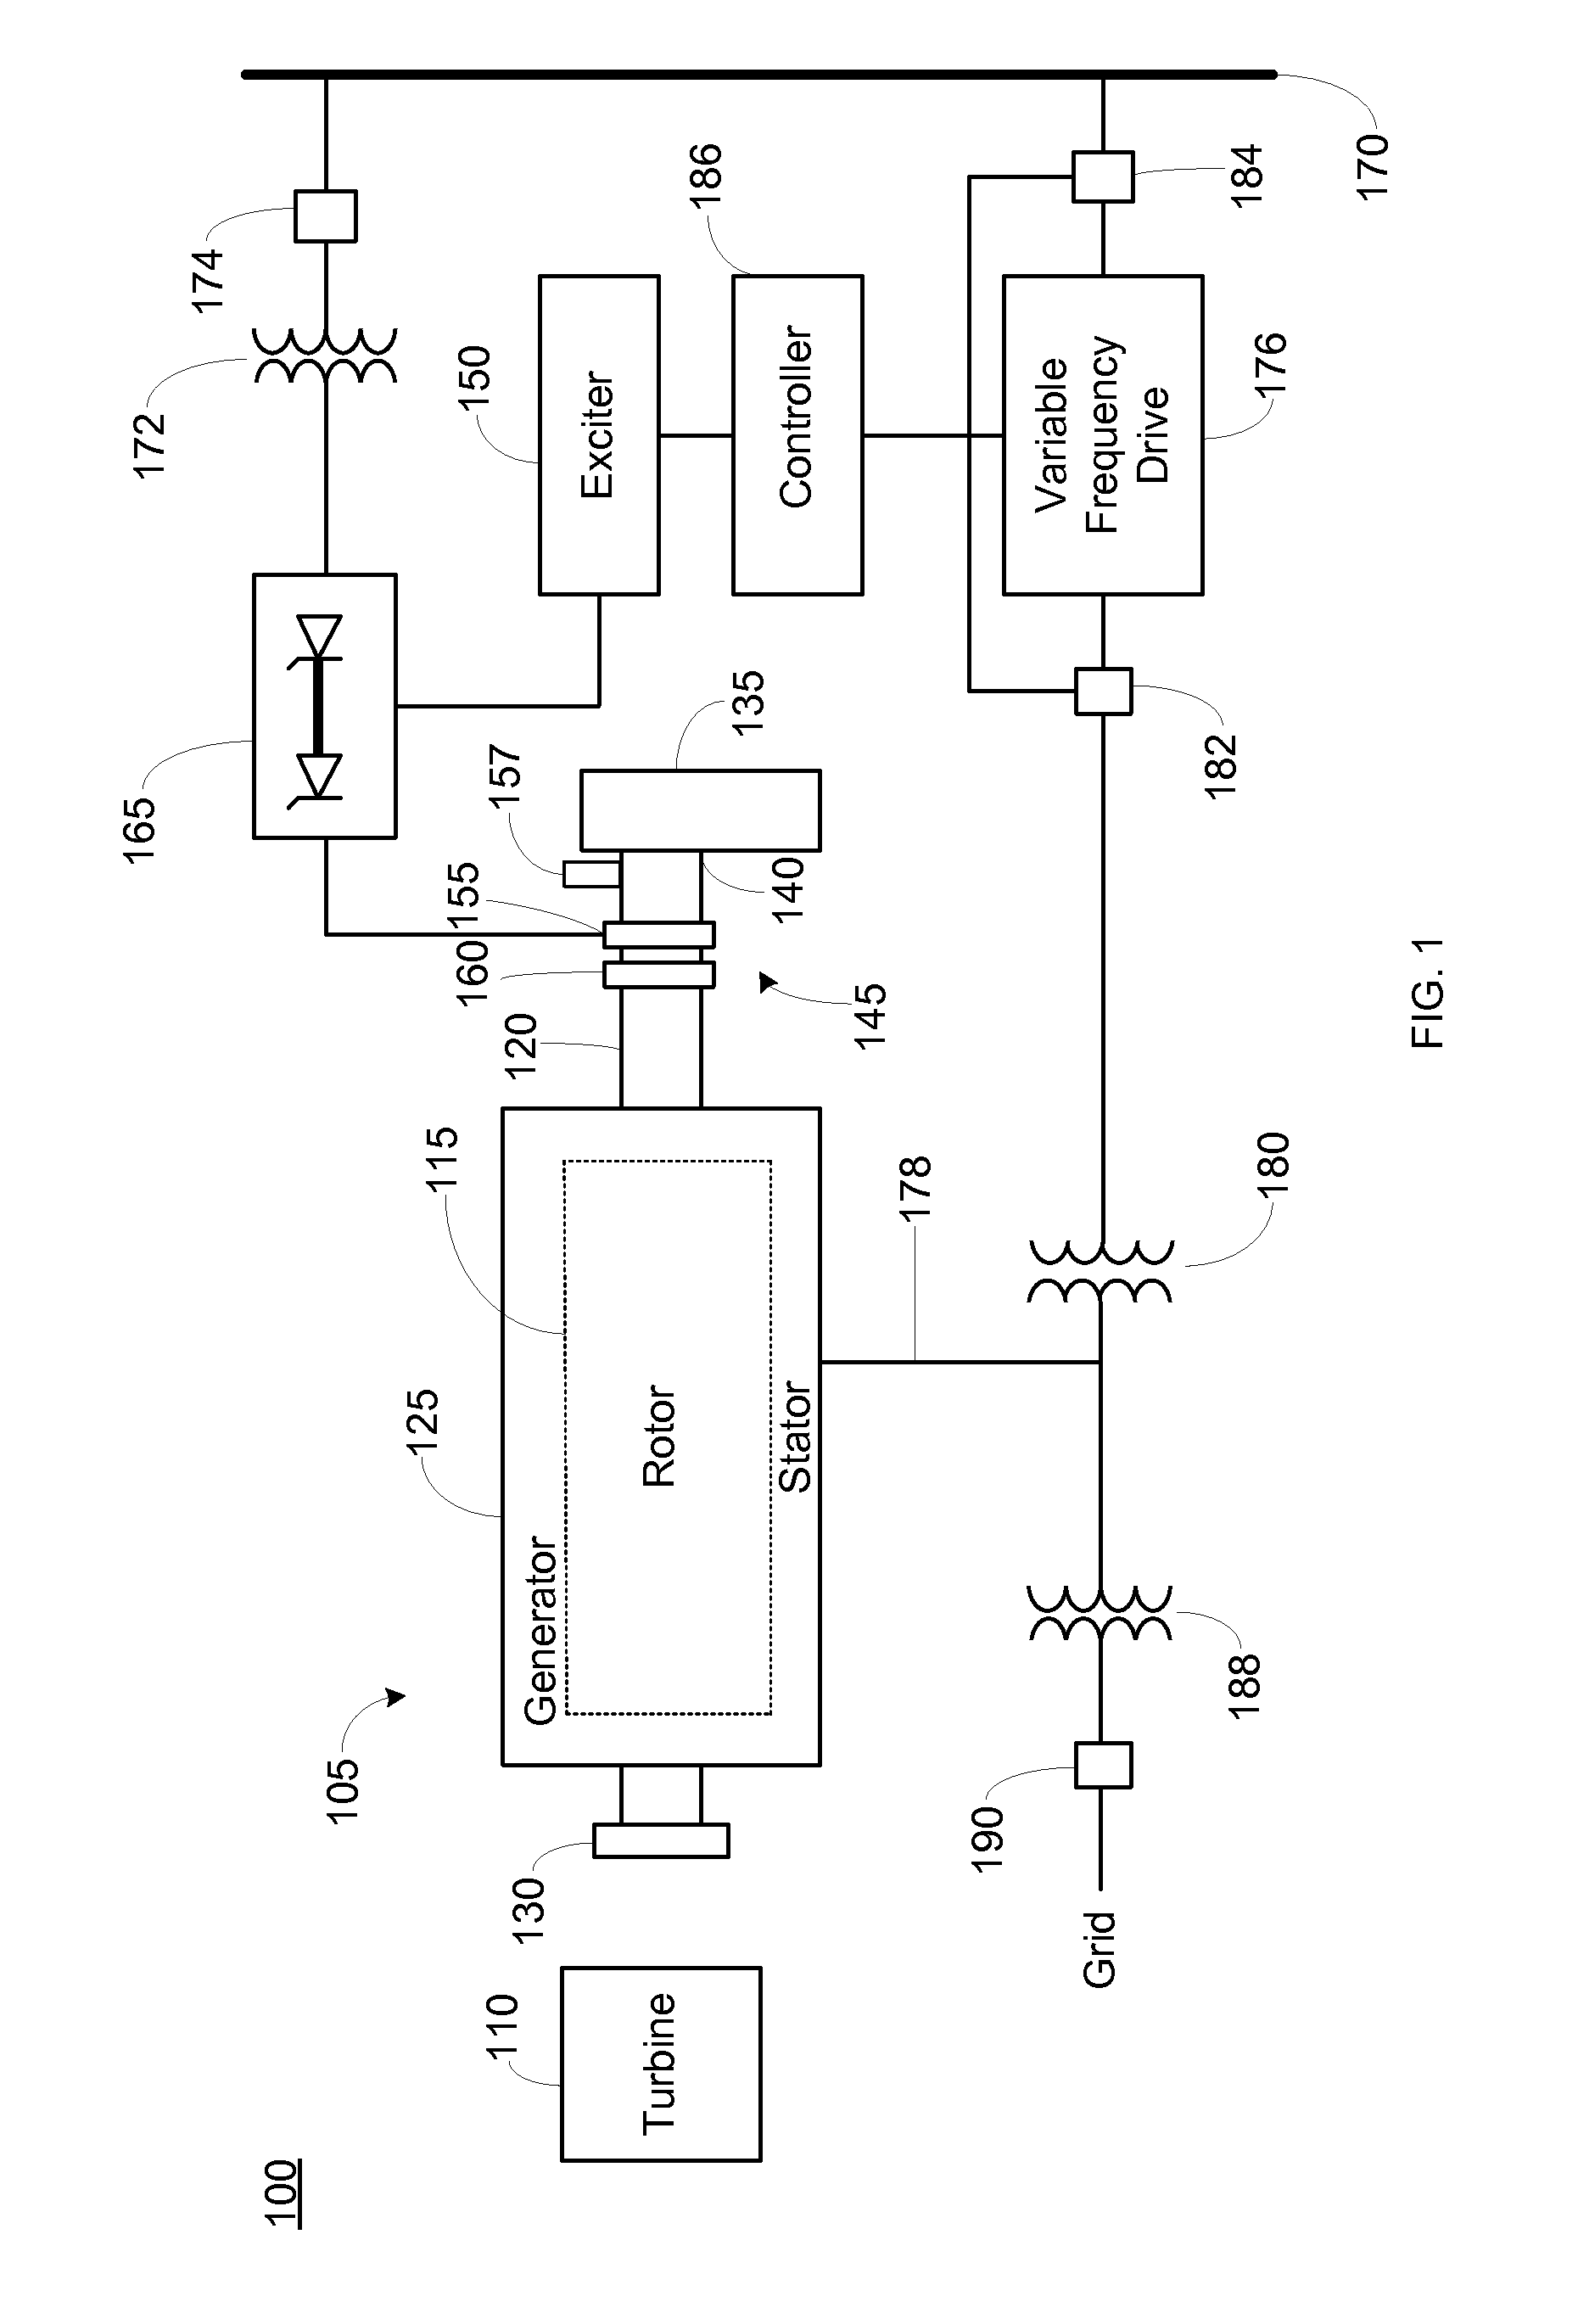 Conversion of synchronous generator to synchronous condenser